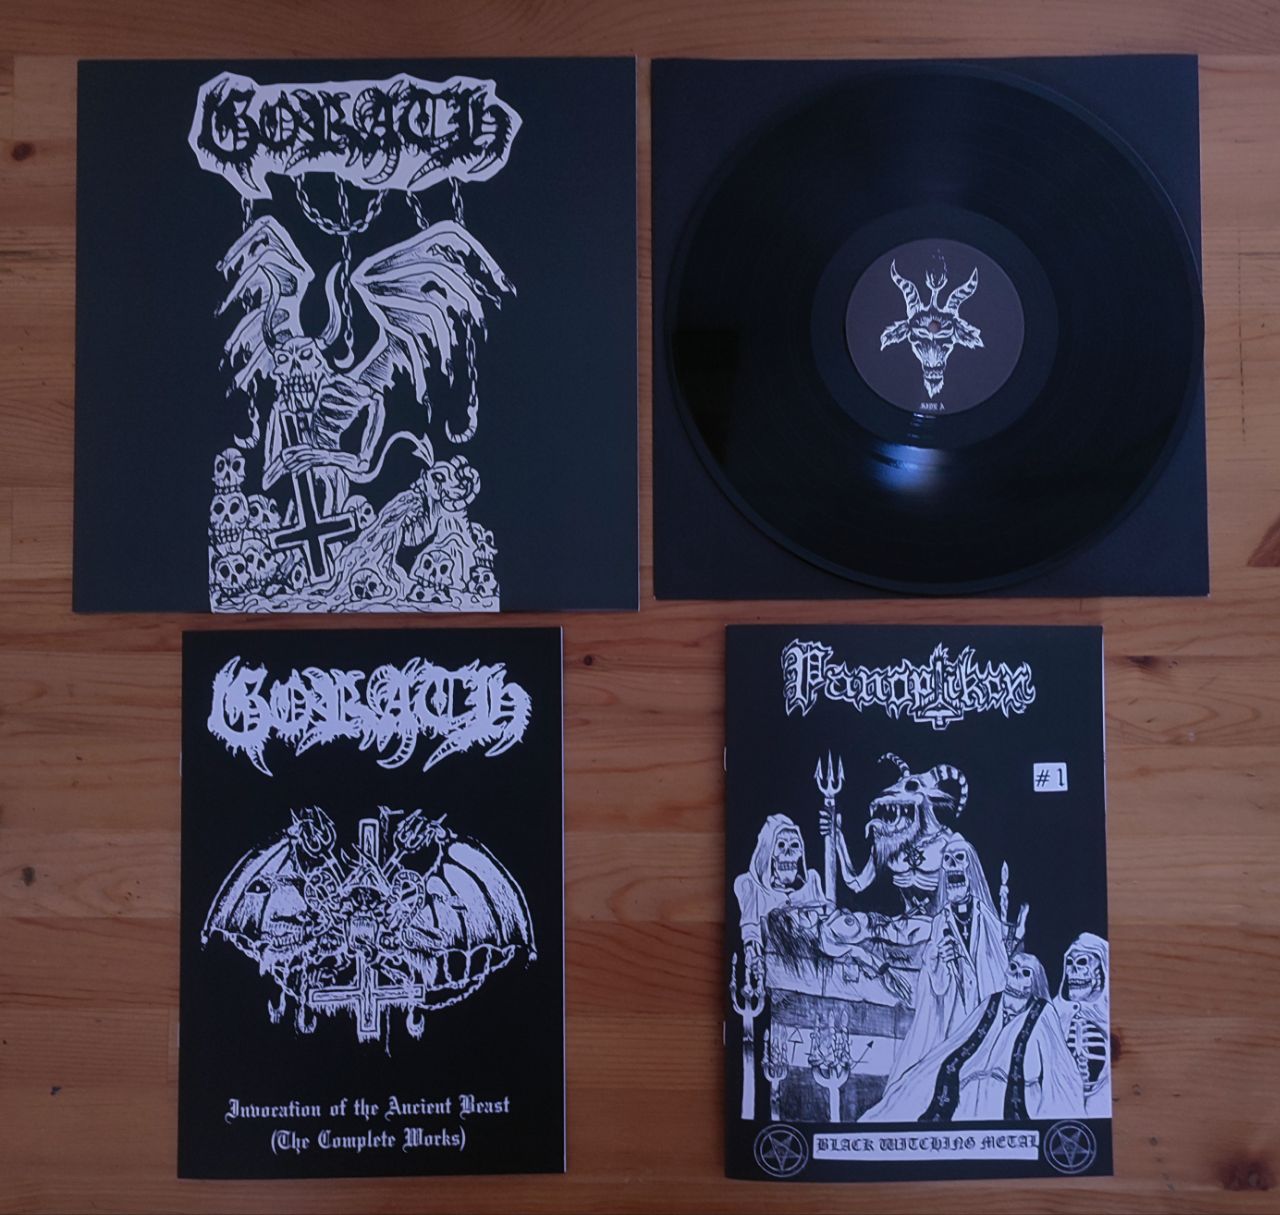 Gorath (ES) "Invocation of the Ancient Beast" - 12" LP + A4 Booklet + Panopticon Zine *New in Stock*